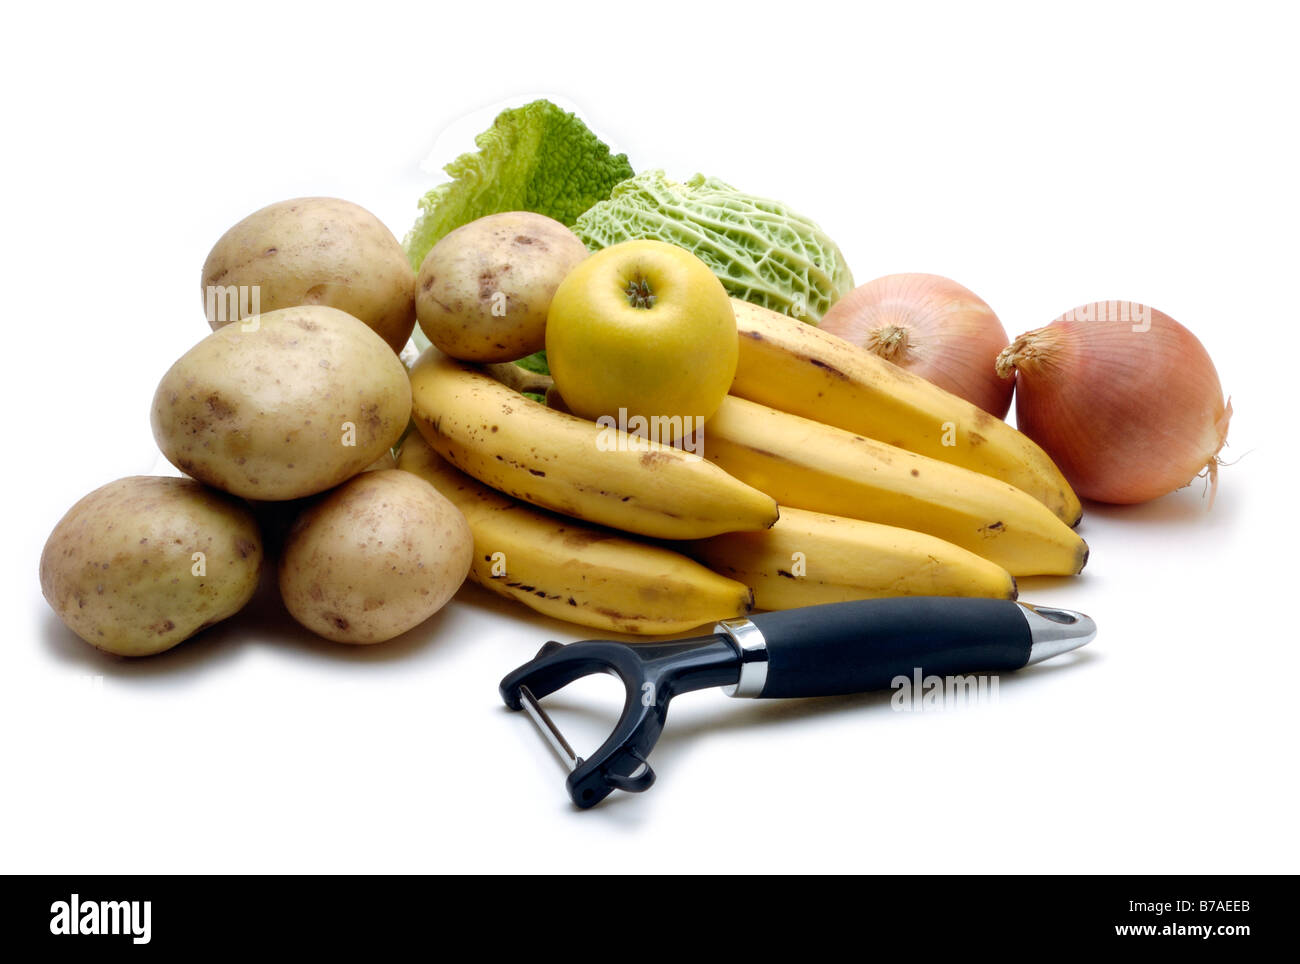 Studio shot of a Selection of fruit and vegetables on a white background. Stock Photo